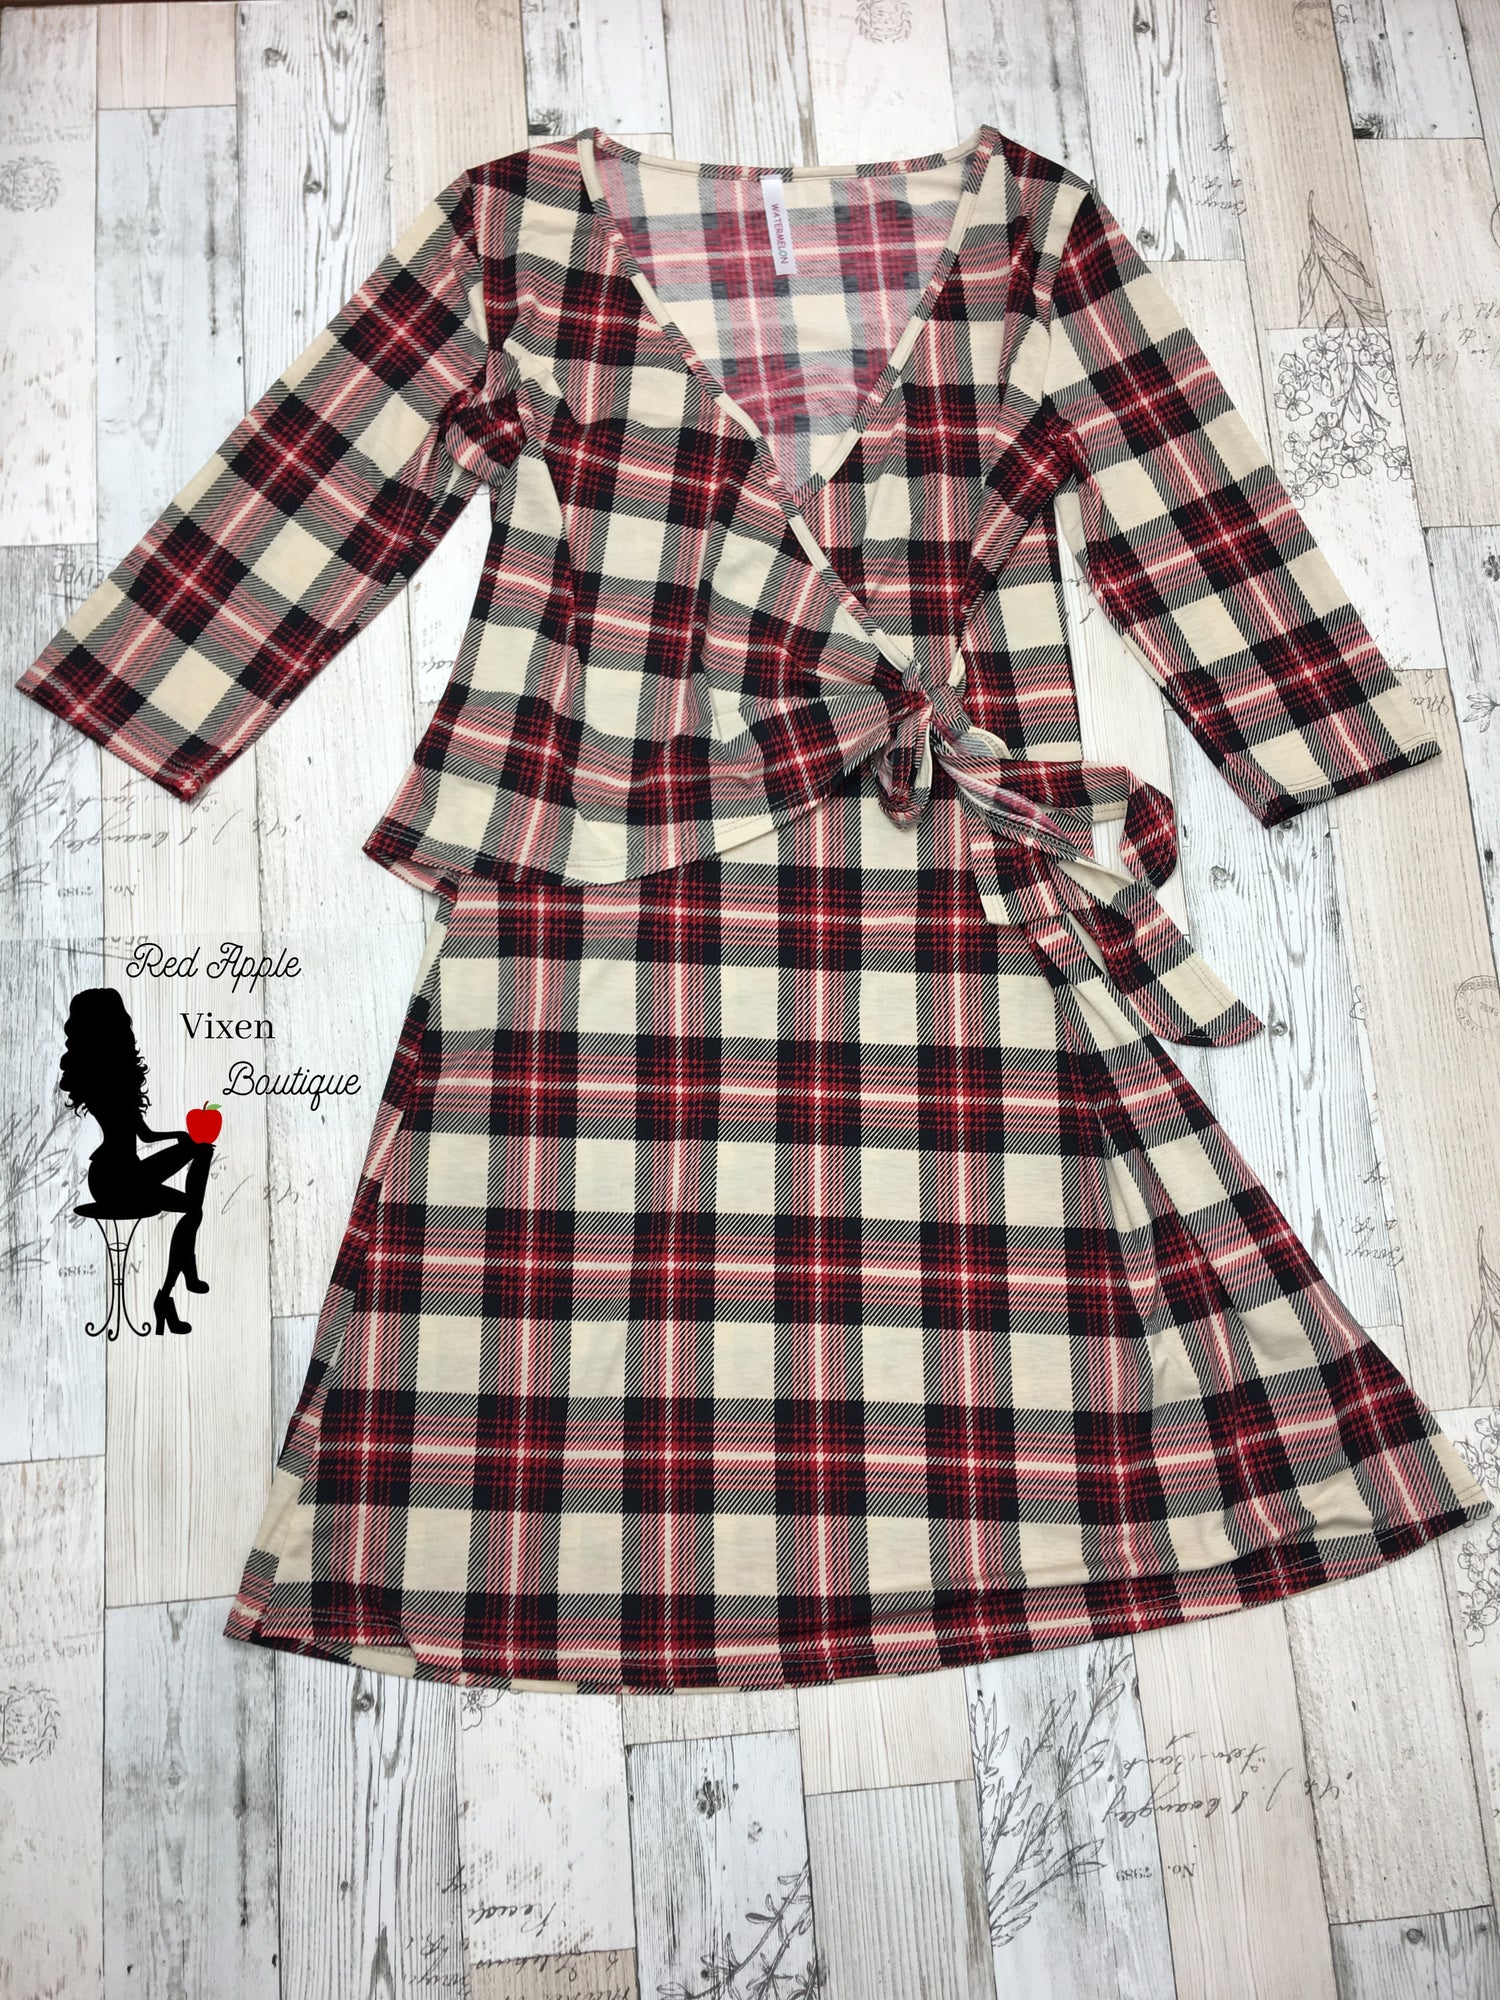 Red and Cream Plaid Wrap Dress - Red Apple Vixen Boutique